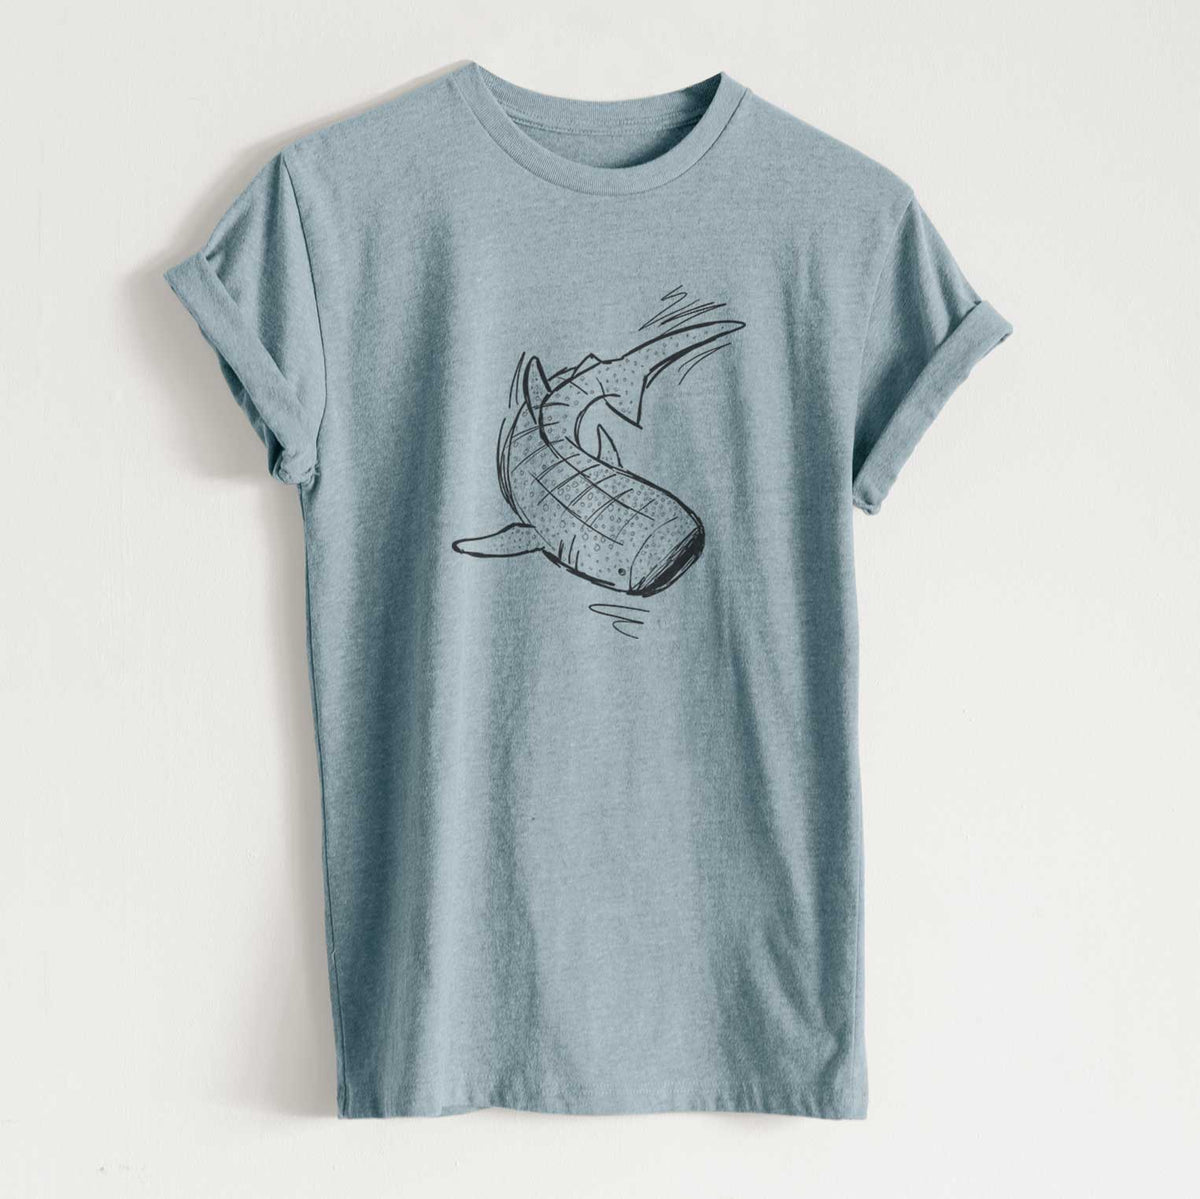 Whale Shark - Unisex Recycled Eco Tee  - CLOSEOUT - FINAL SALE